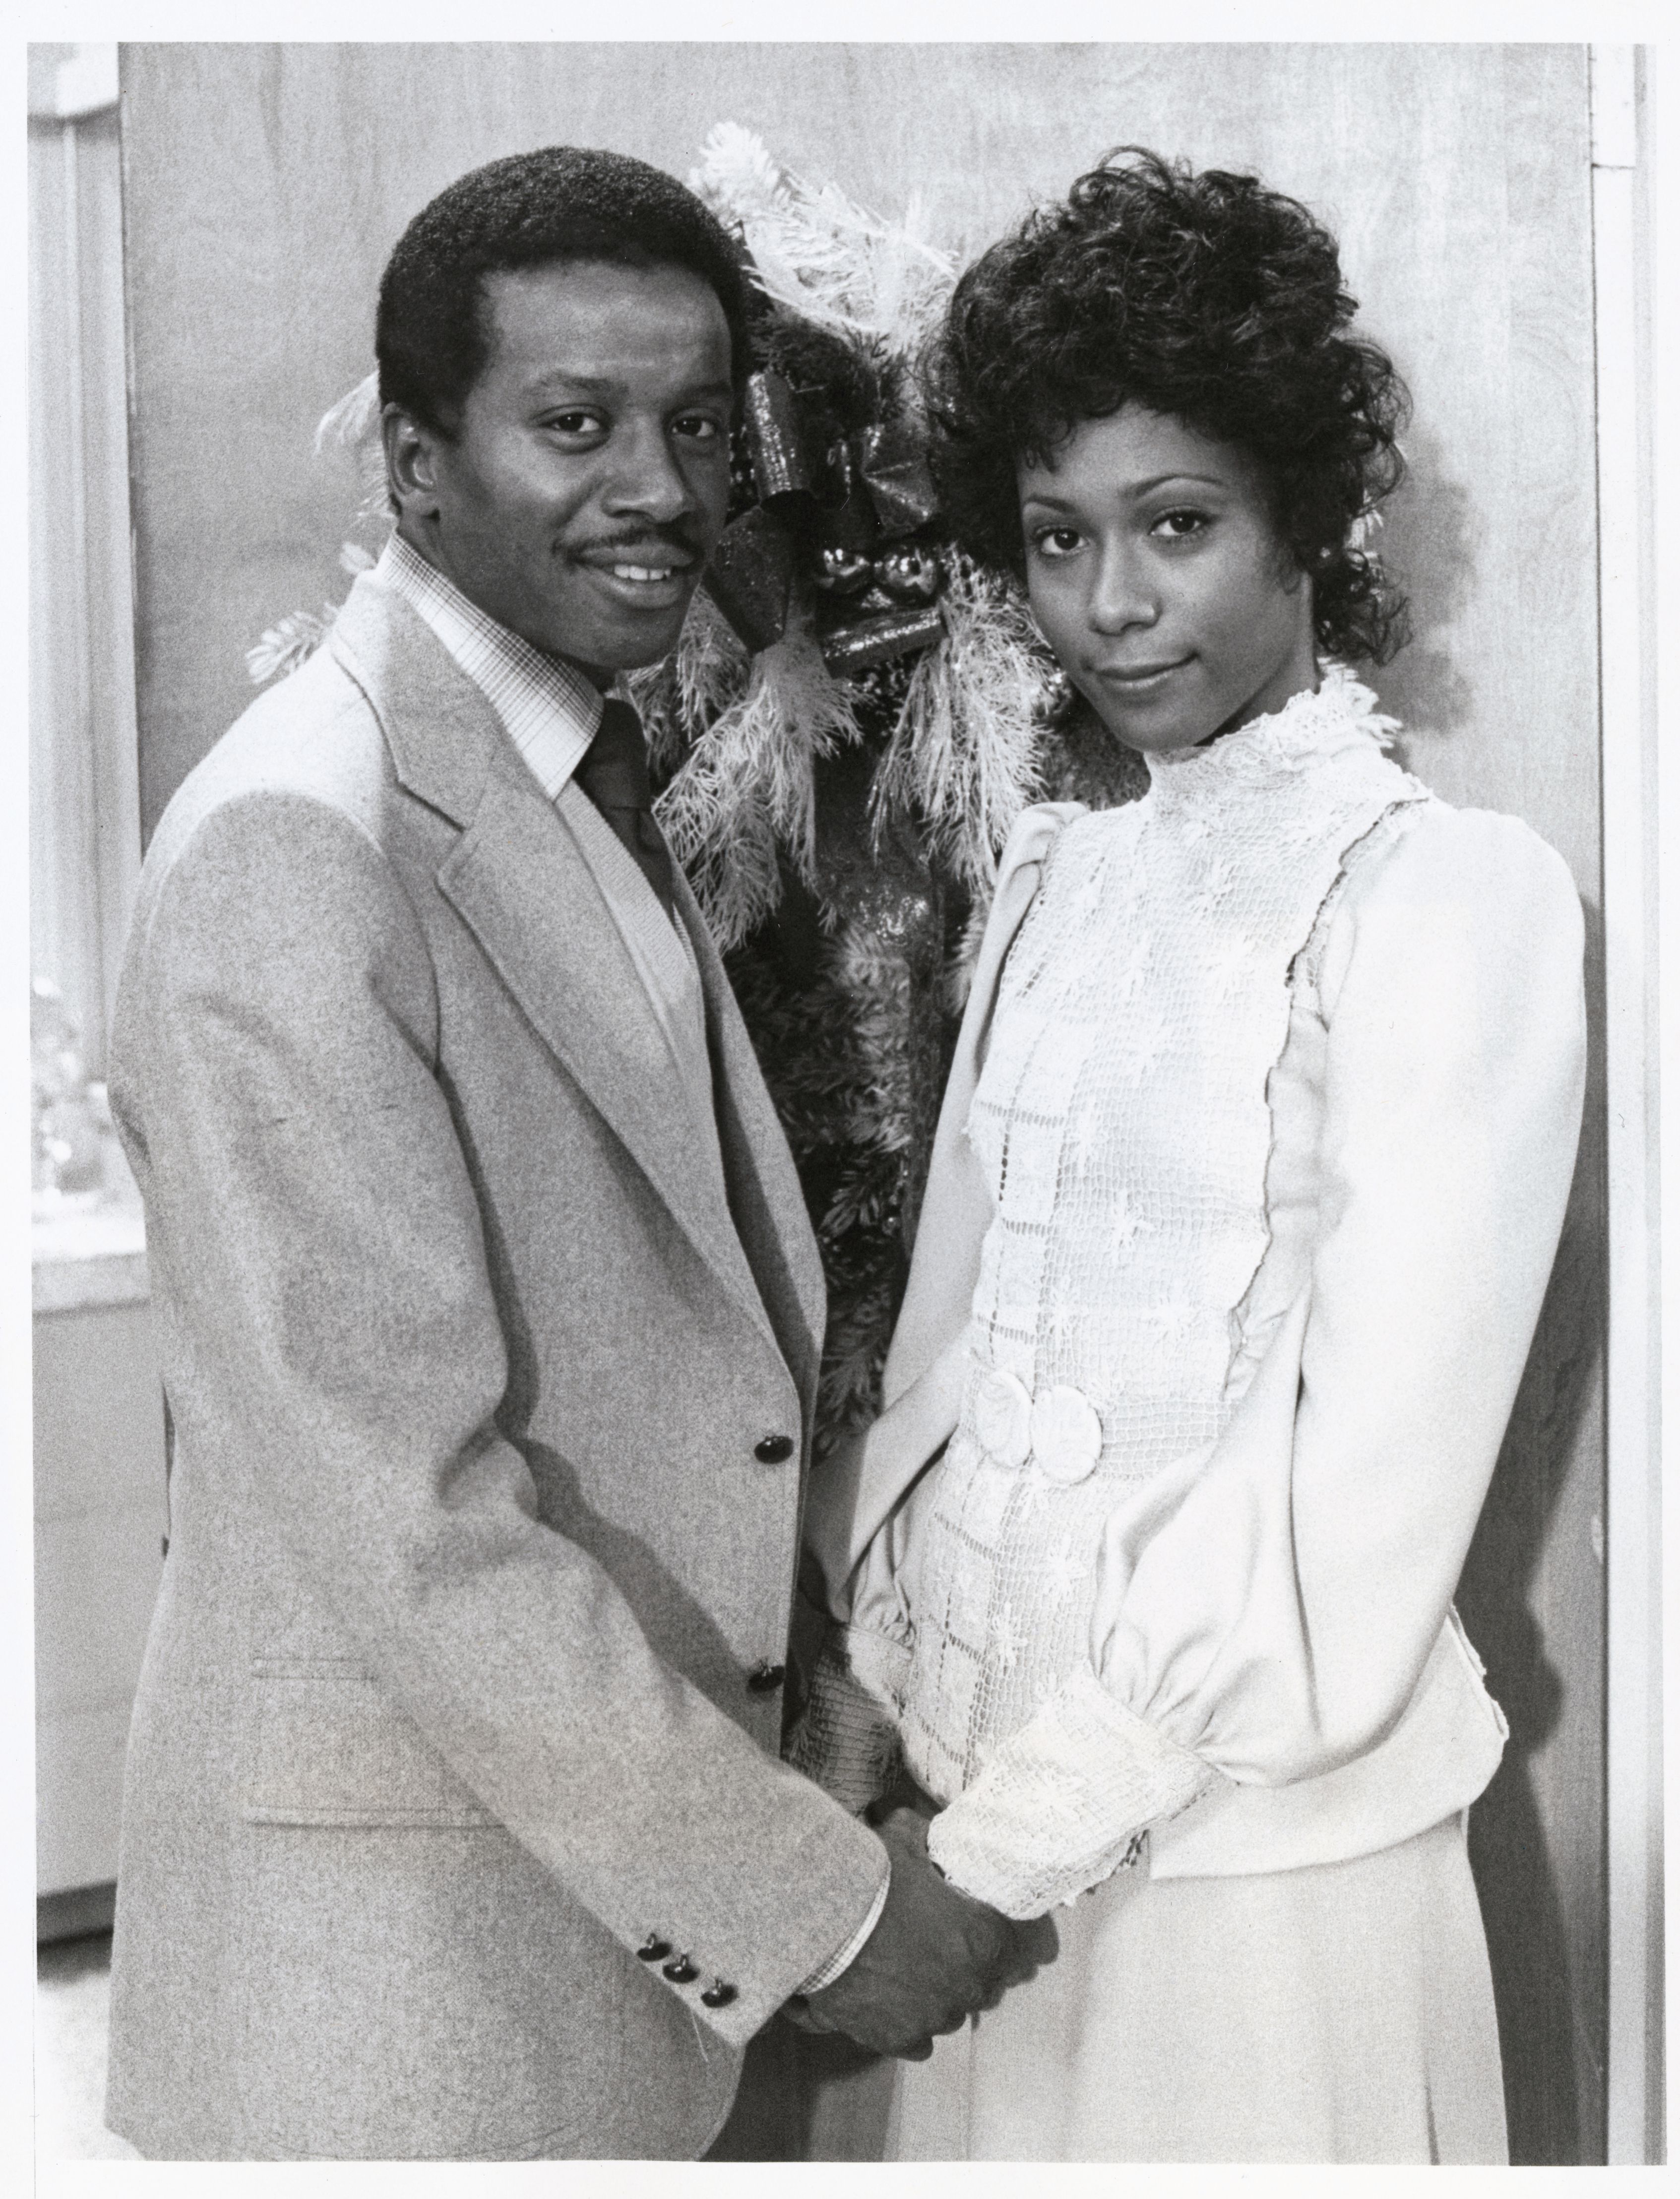 Damon Evans, as Lionel Jefferson, and Berlinda Tolbert, playing Jenny Willis in the sitcom, "The Jeffersons."| Photo: GettyImages